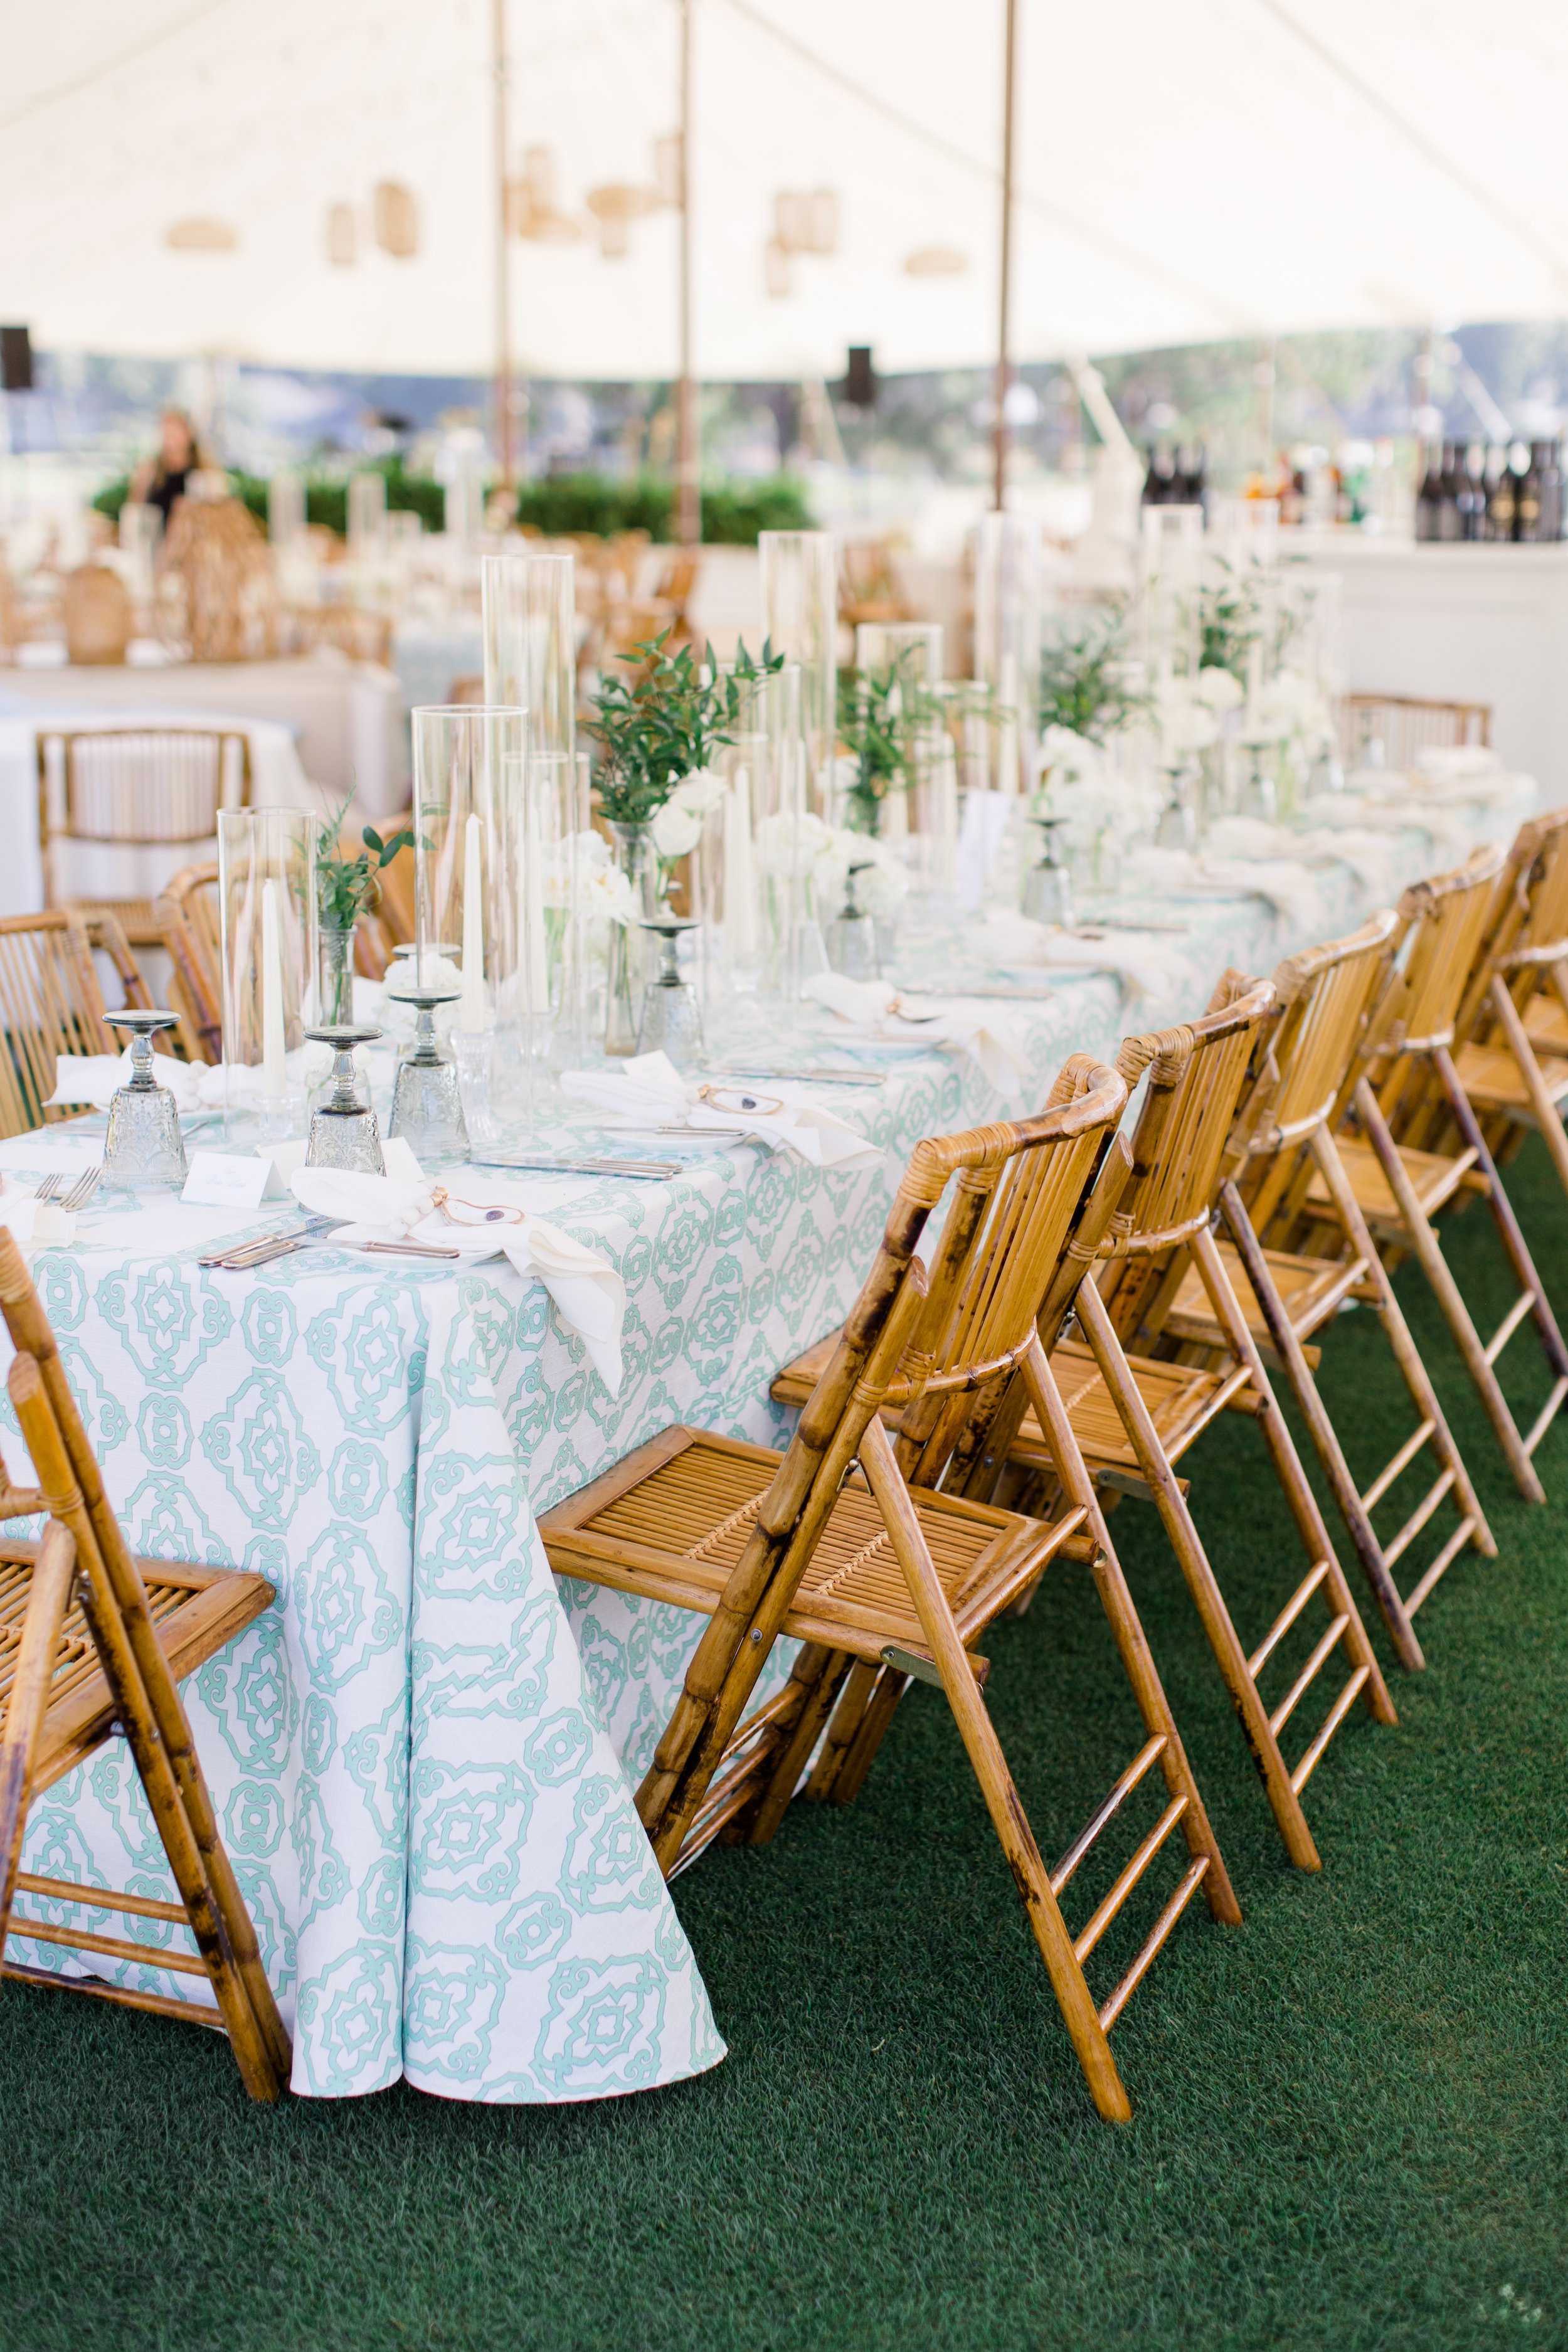 a-southern-chic-south-carolina-wedding-at-the-colleton-river-club-featuring-sophisticated-modern-florals-designed-by-savannah-florist-ivory-and-beau-11.jpg